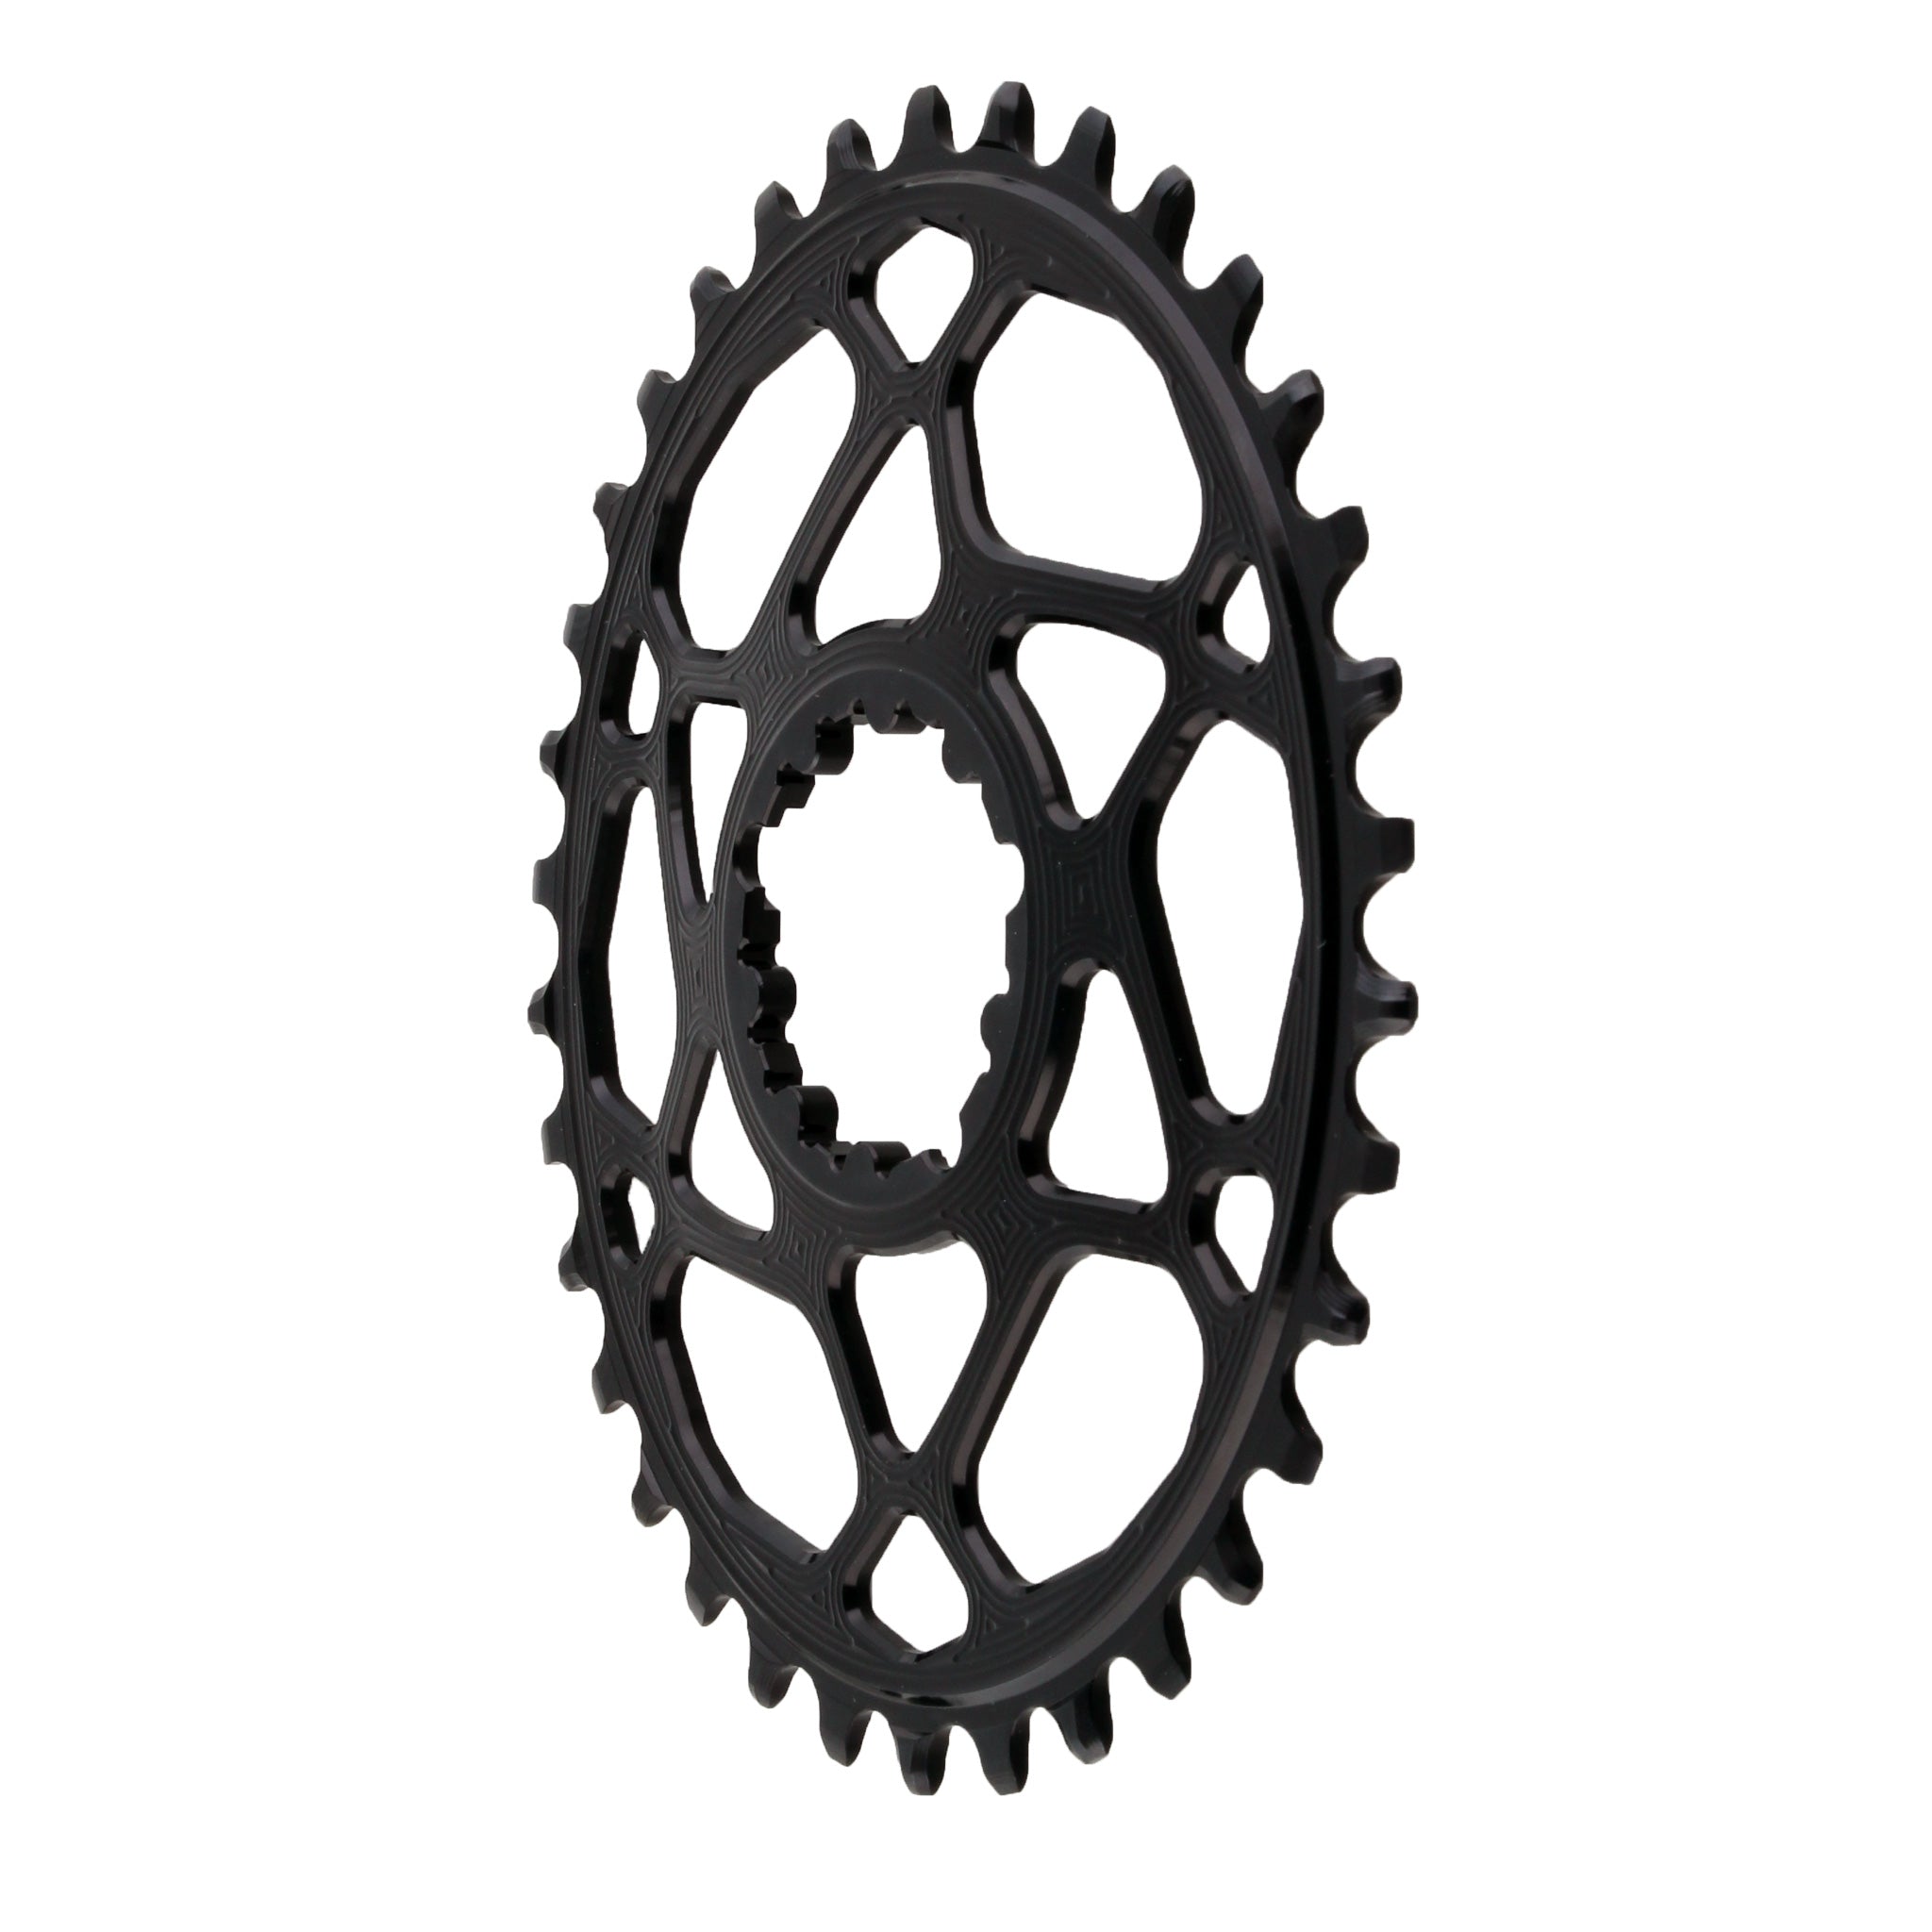 Avance Absolute Black Oval Sram Direct Mount 34 dientes, boost negro